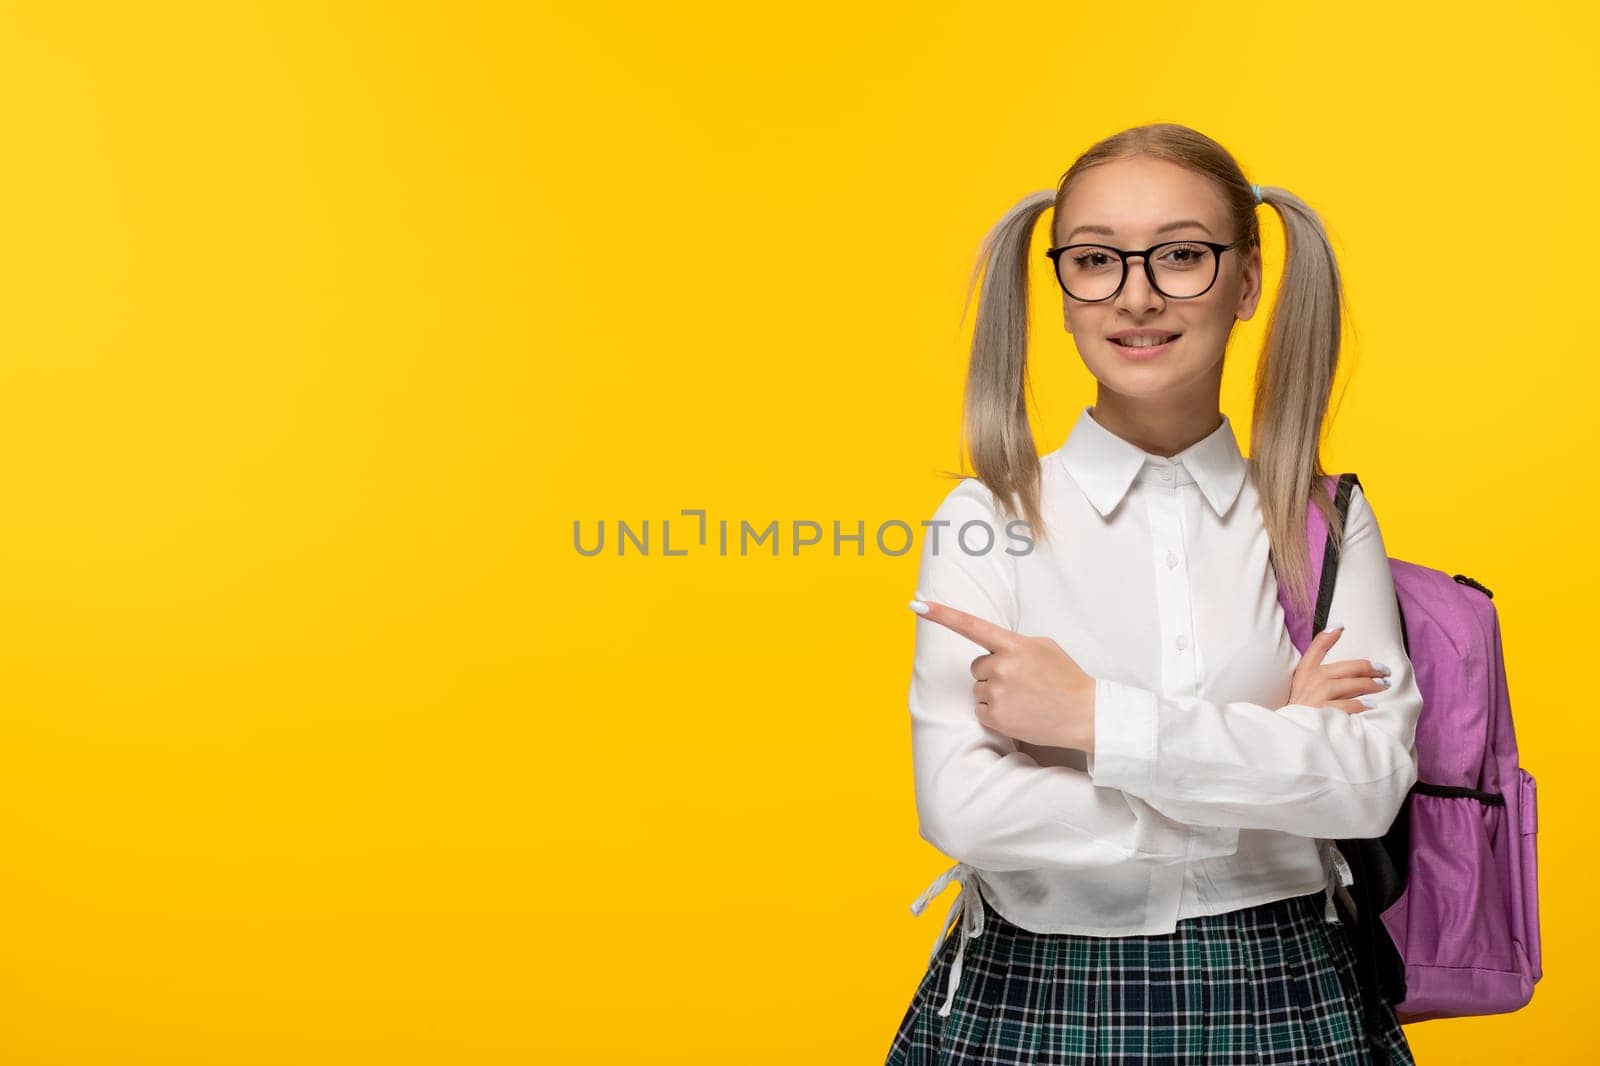 world book day school girl with crossed hands on yellow background with backpack by Kamran